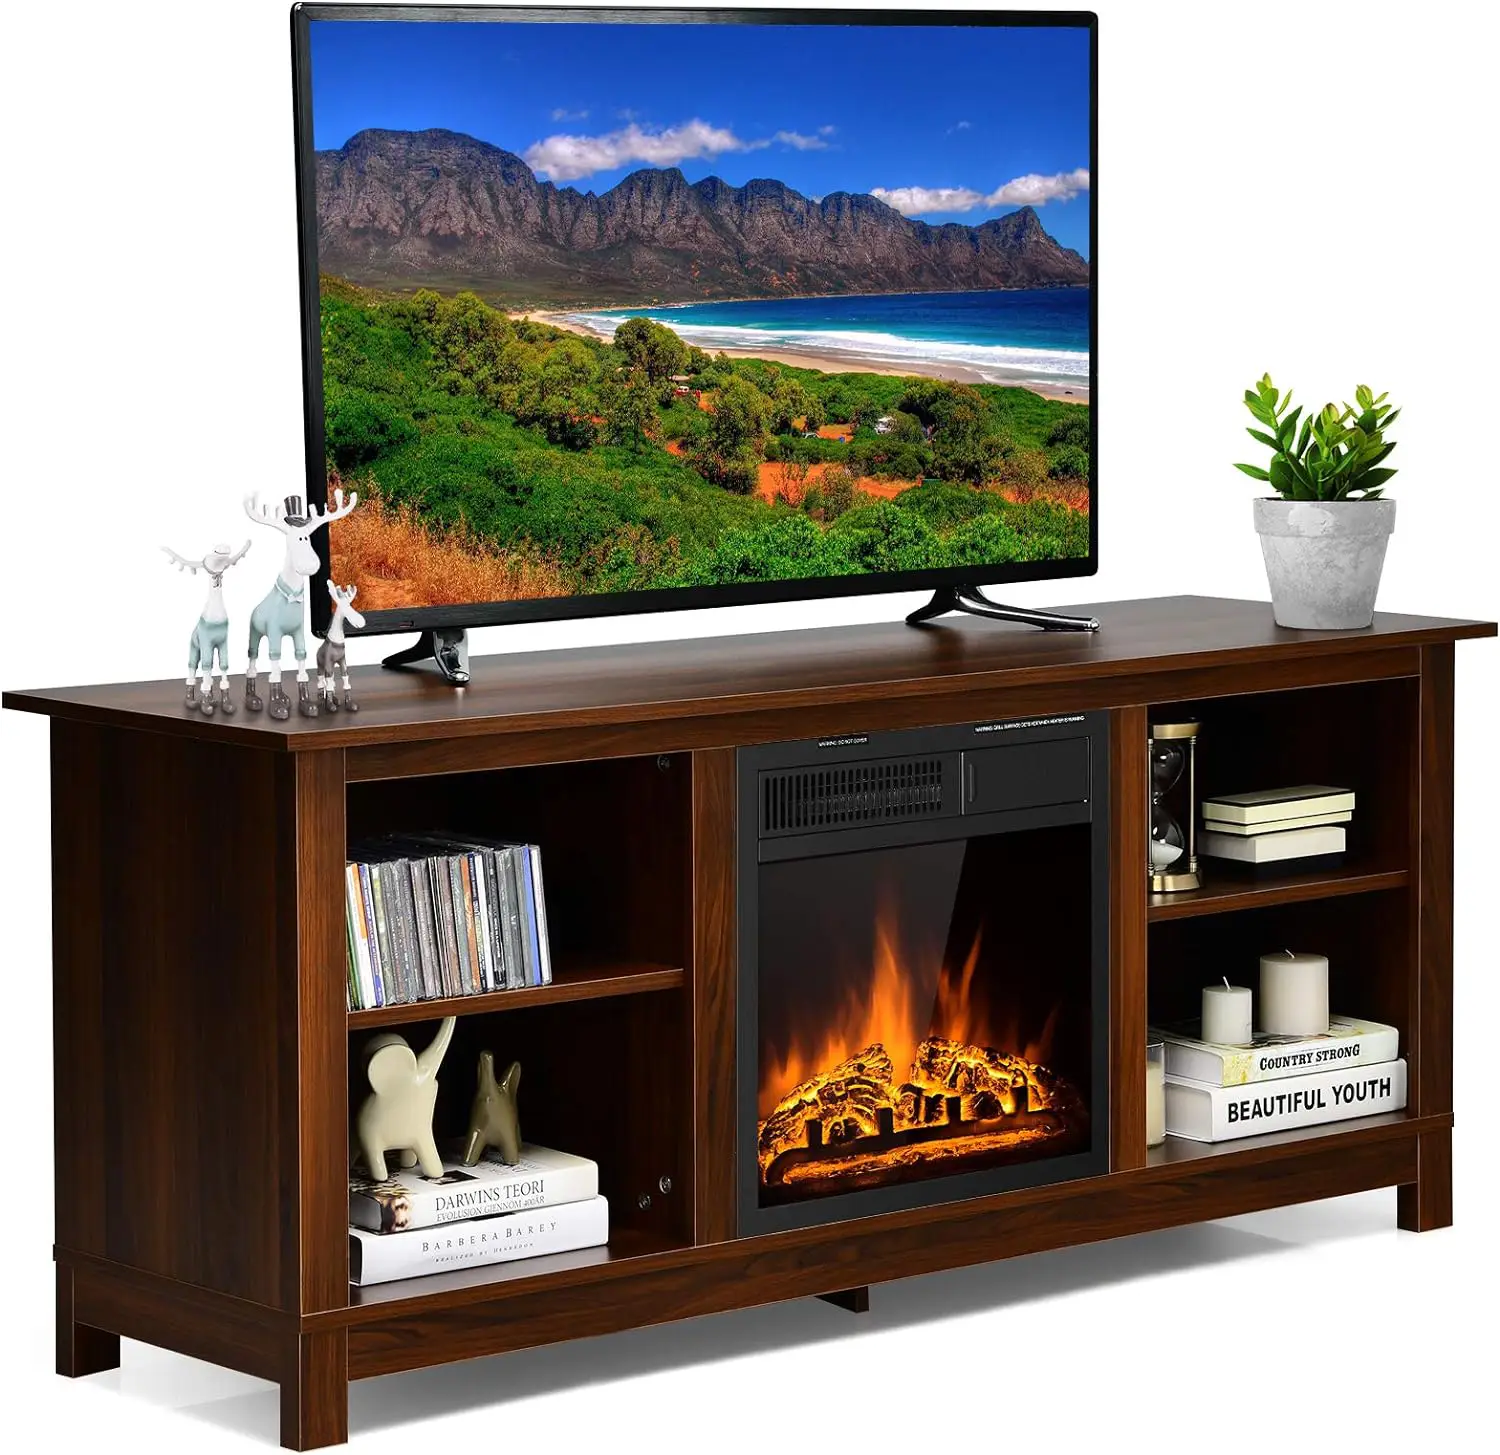 Tangkula Fireplace TV Stand for TVs up to 65 Inches,